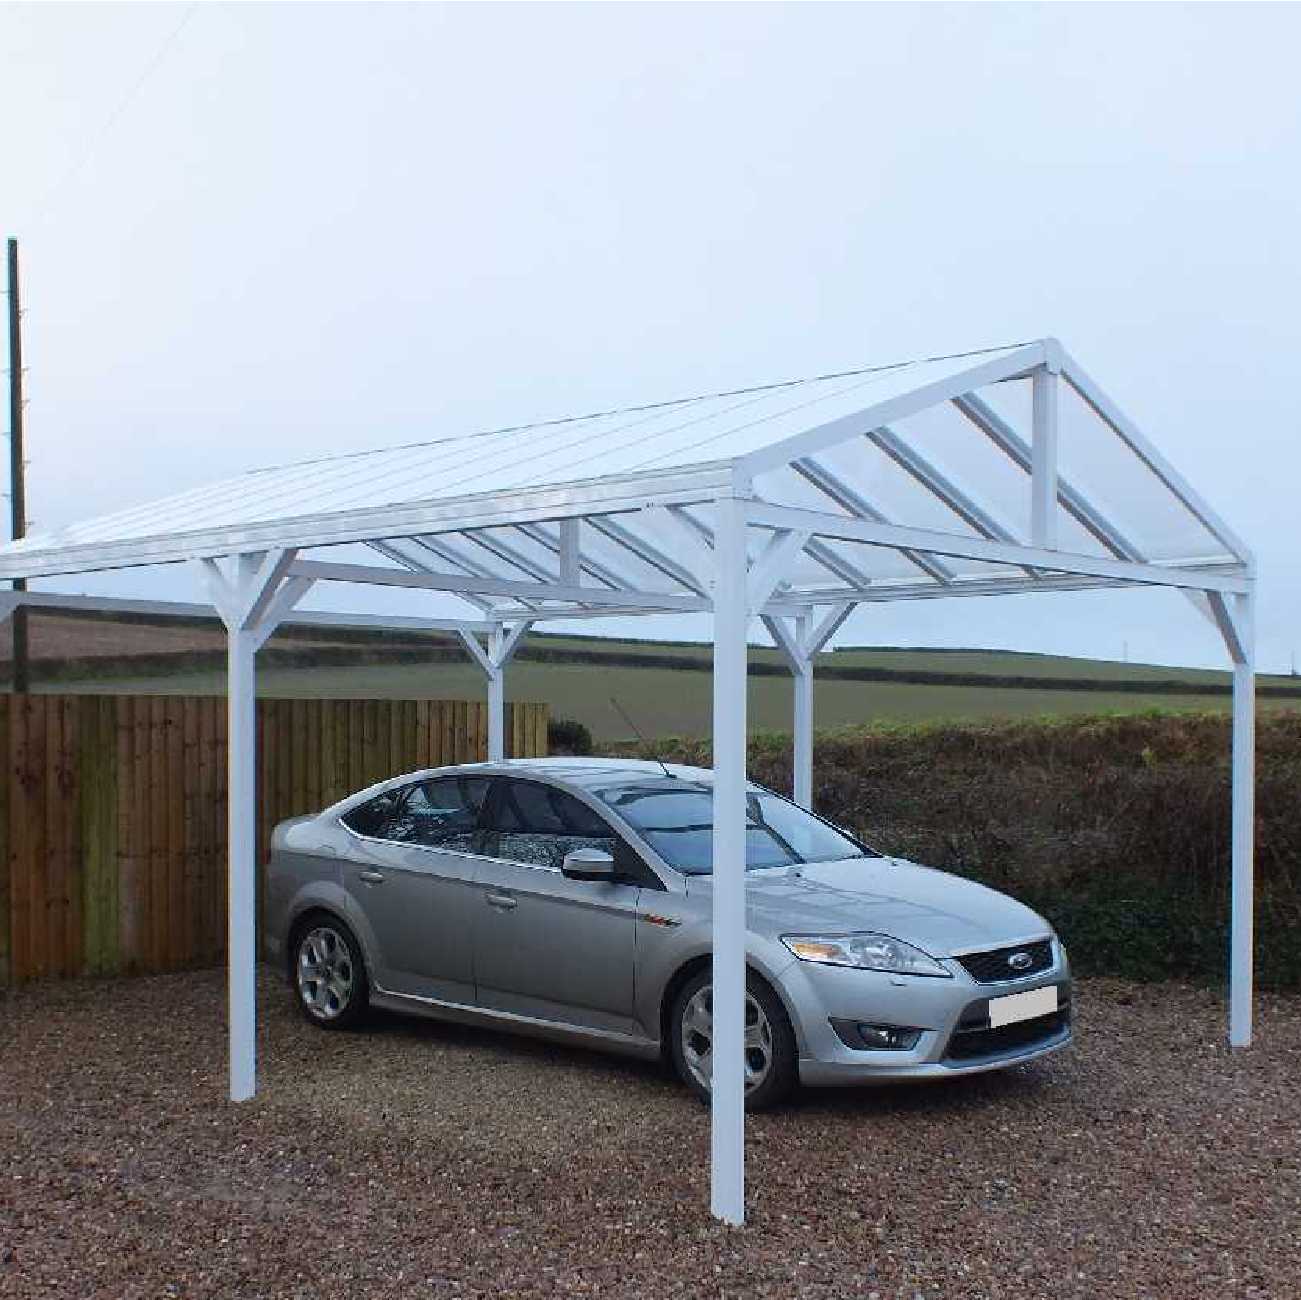 Affordable Omega Smart Free-Standing, White Gable-Roof (type 1) Canopy with 16mm Polycarbonate Glazing - 6.3m (W) x 3.5m (P), (8) Supporting Posts